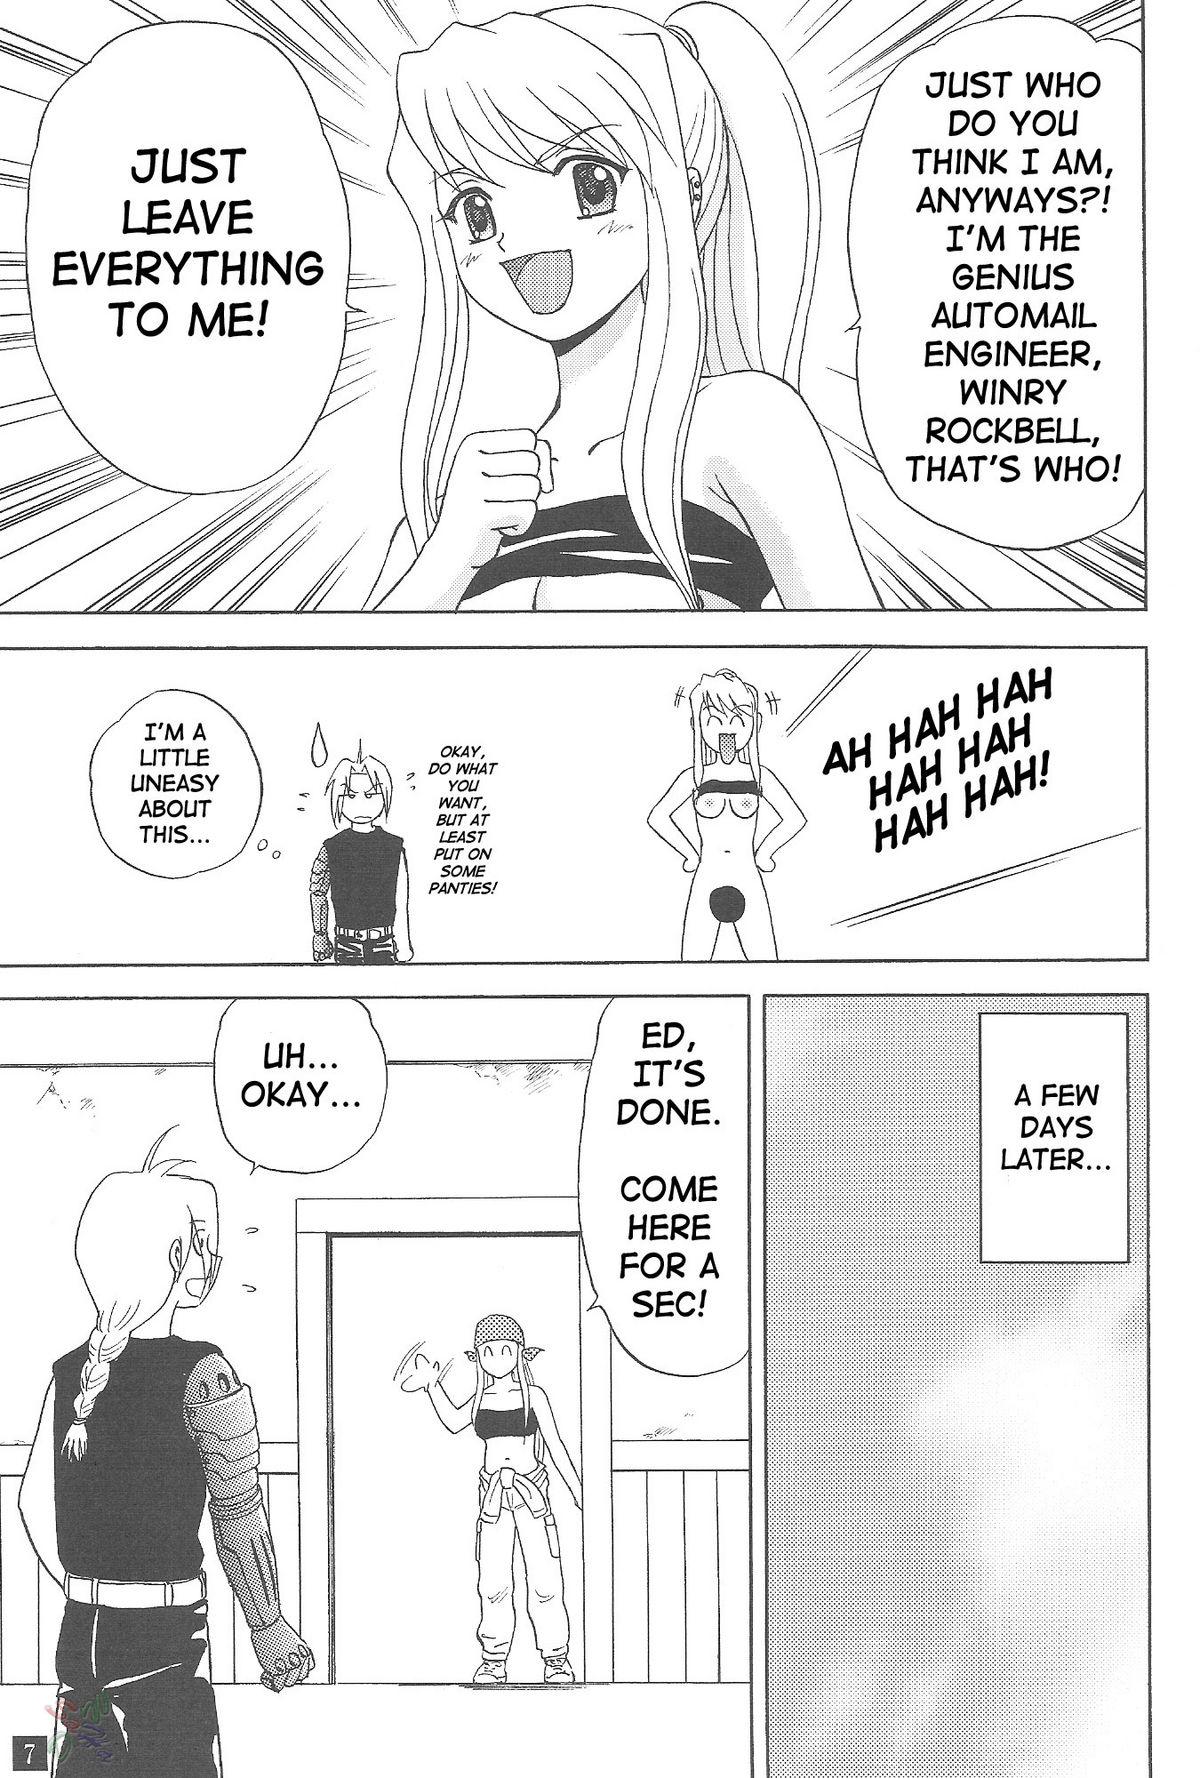 Gay Cock Winry no Win'win | Winry's Vibrator - Fullmetal alchemist Shemales - Page 8